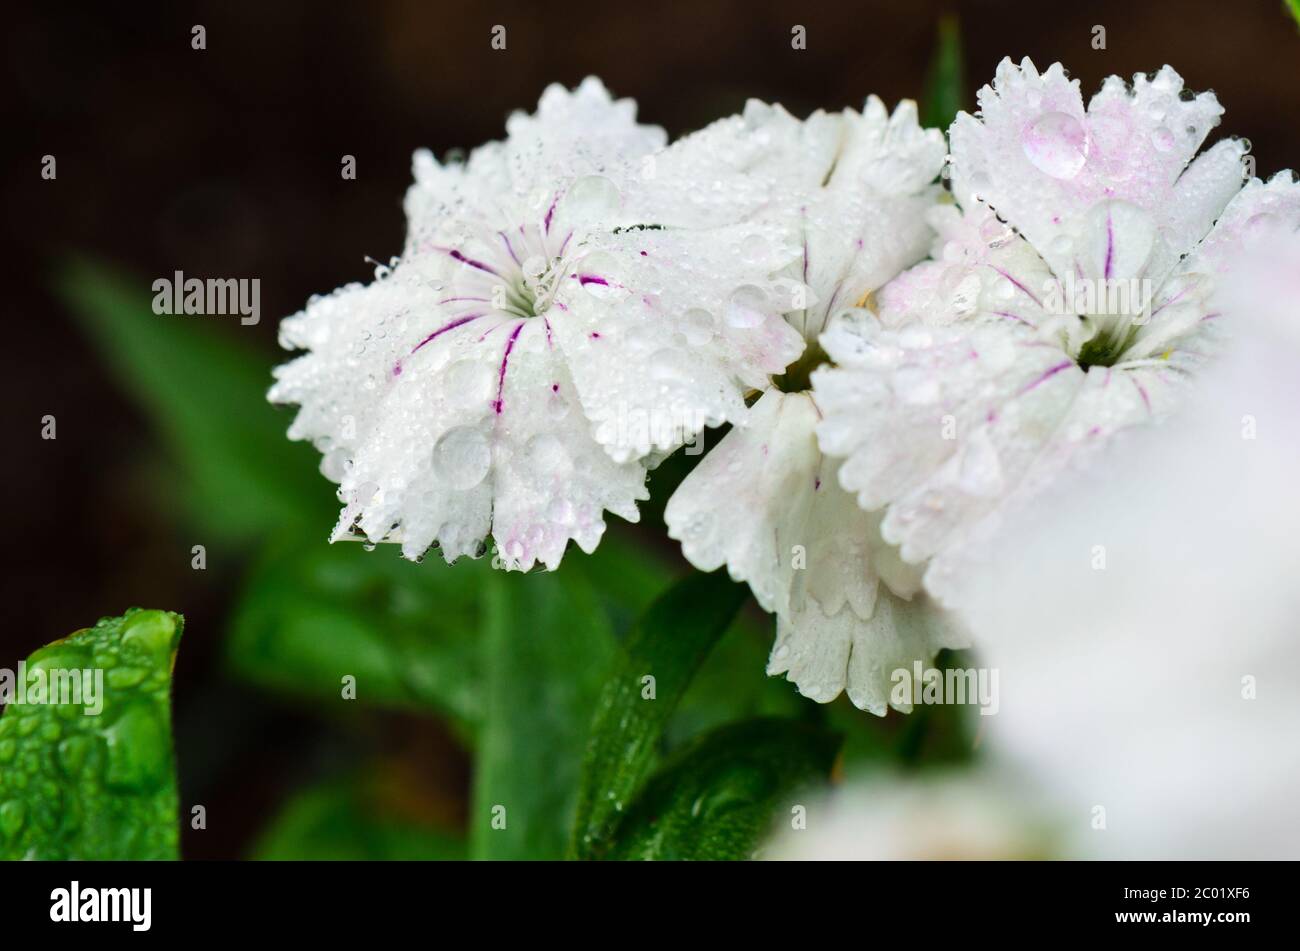 White Dianthus flowers filled with dew drops Stock Photo